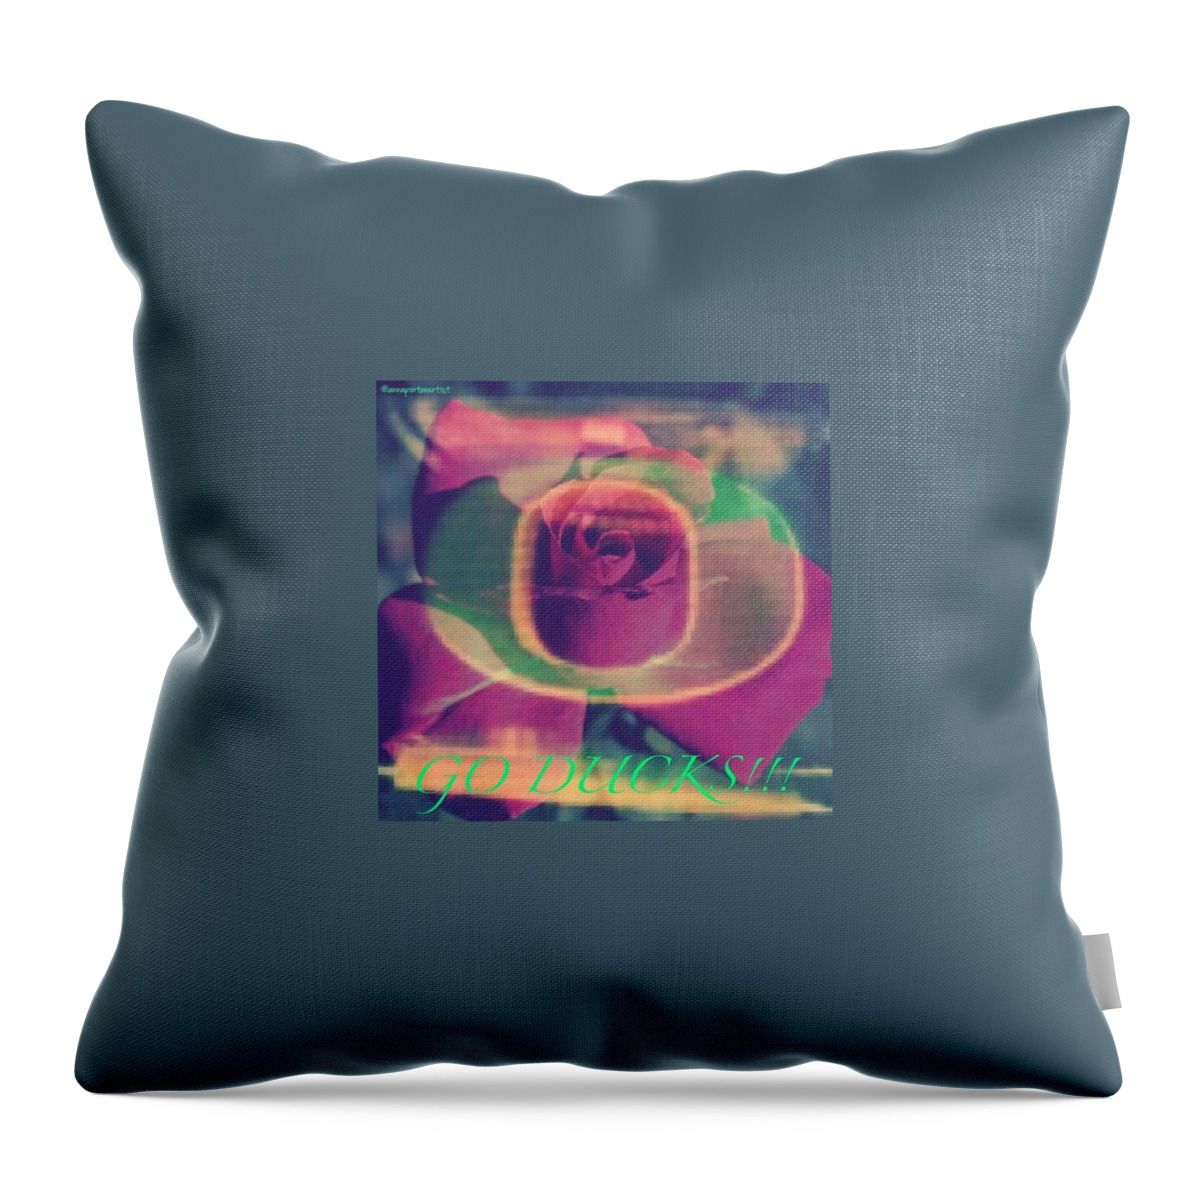 How About Those Ducks Throw Pillow featuring the photograph How About Those Ducks by Anna Porter